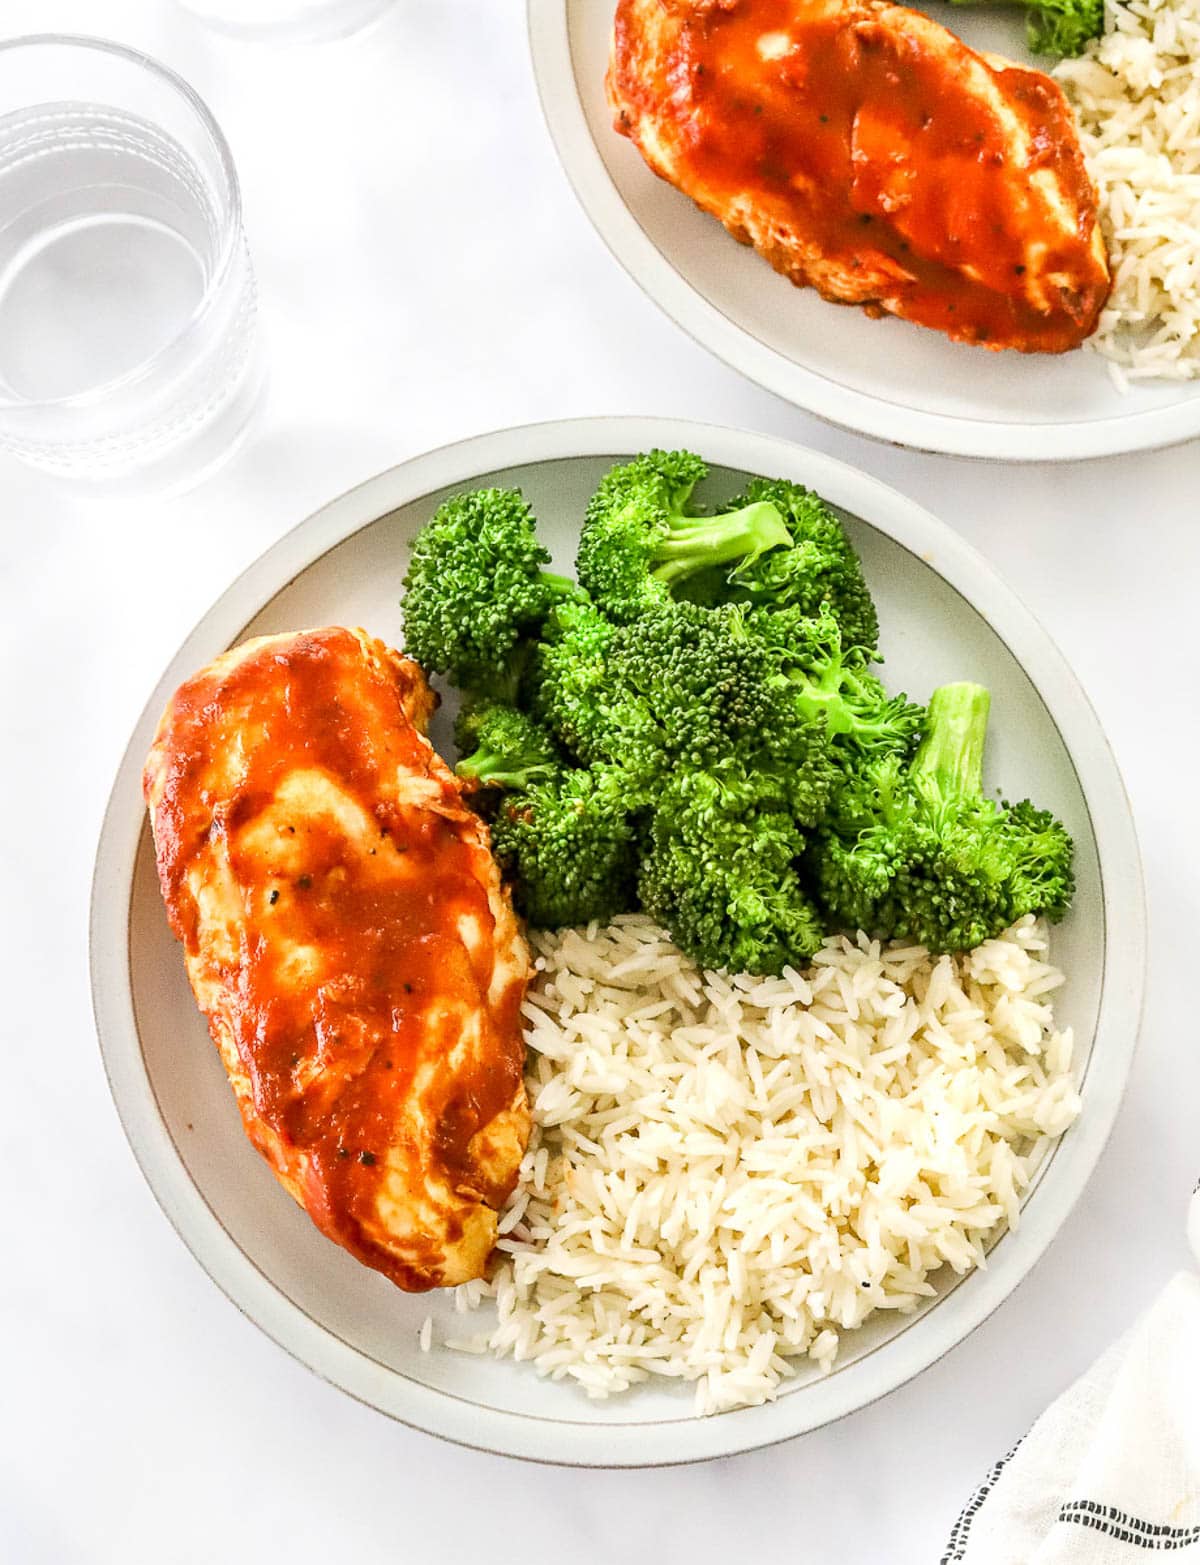 Instant Pot BBQ chicken breast with rice and broccoli on a plate.